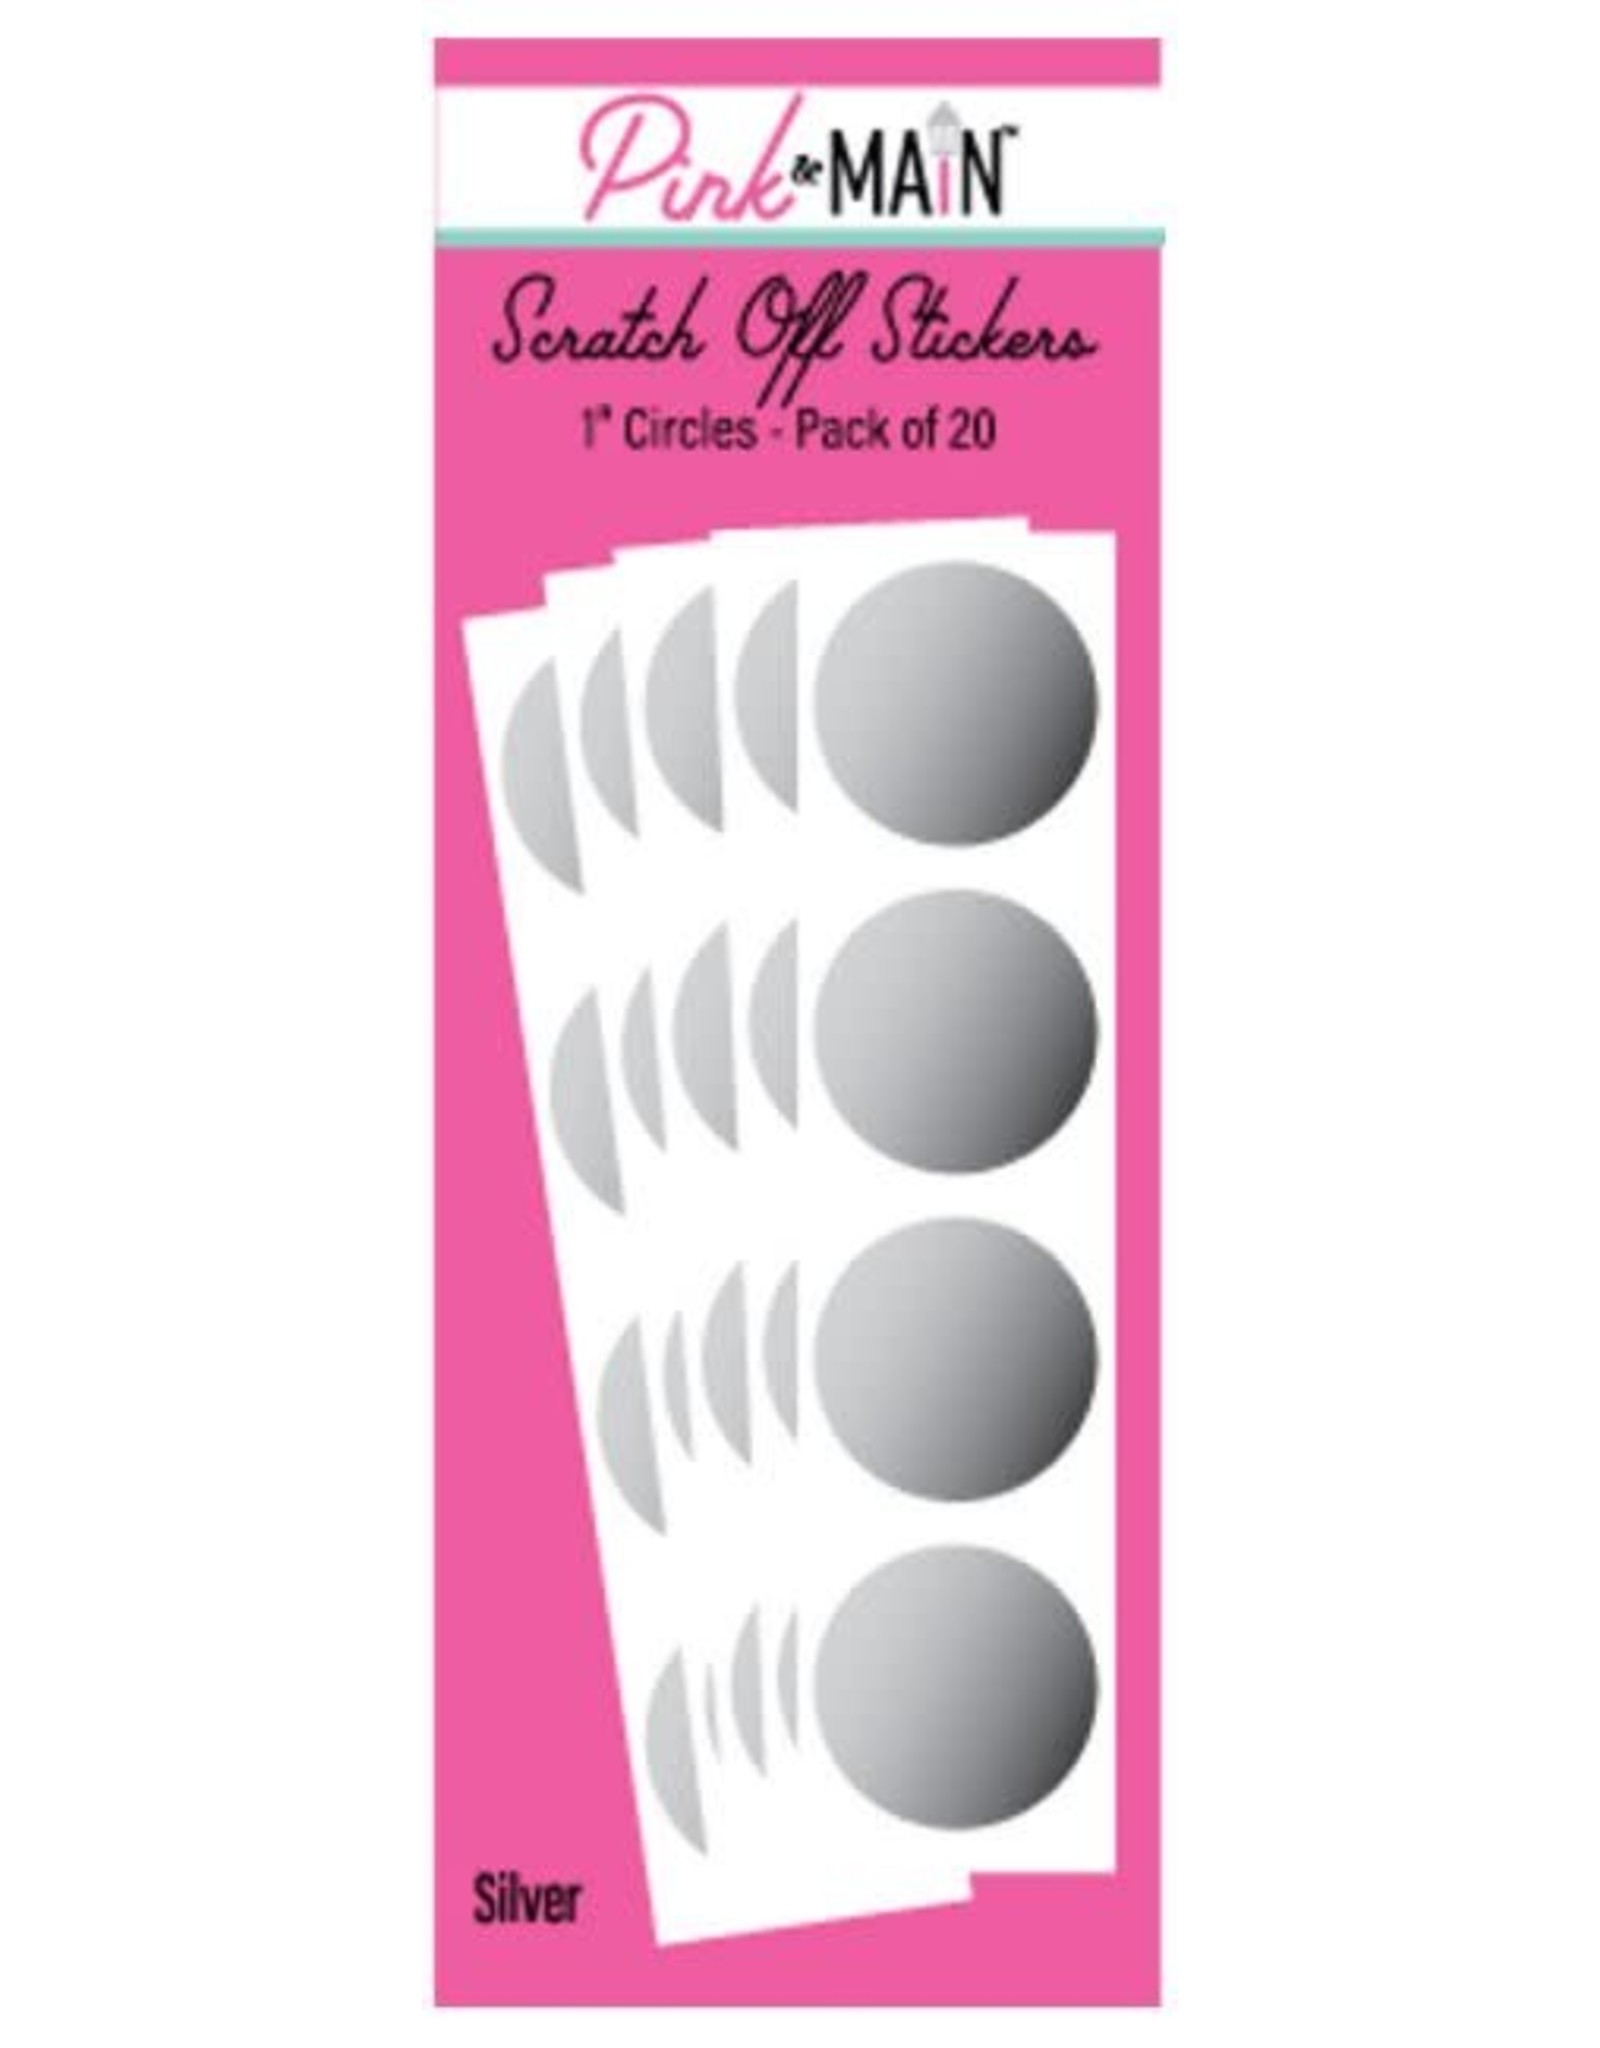 Pink & Main Silver 1" Circle Scratch off Stickers